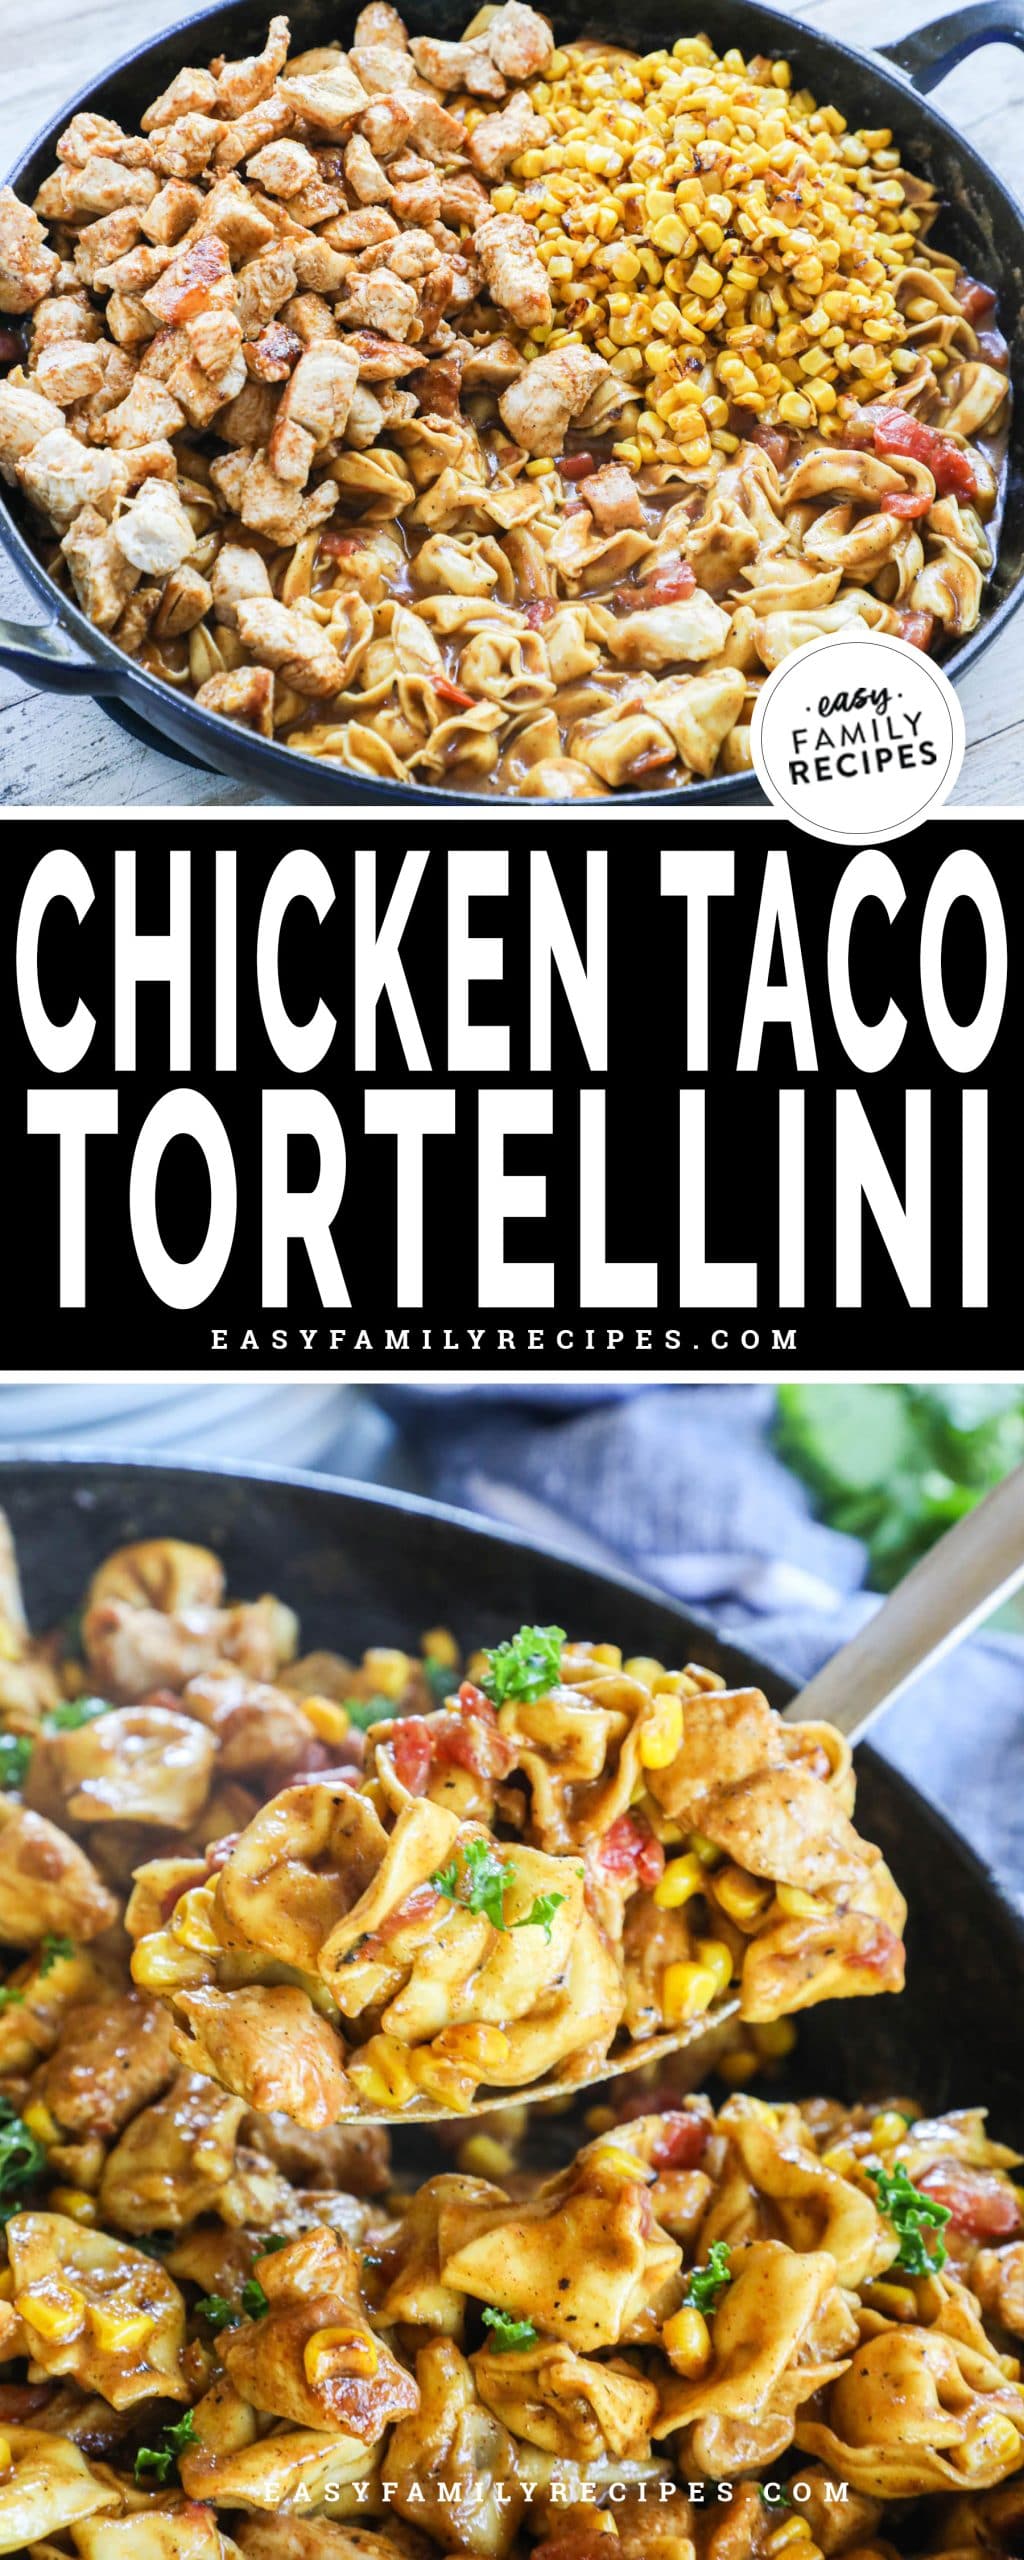 Skillet with chicken breast, tortellini, charred corn, and creamy taco sauce